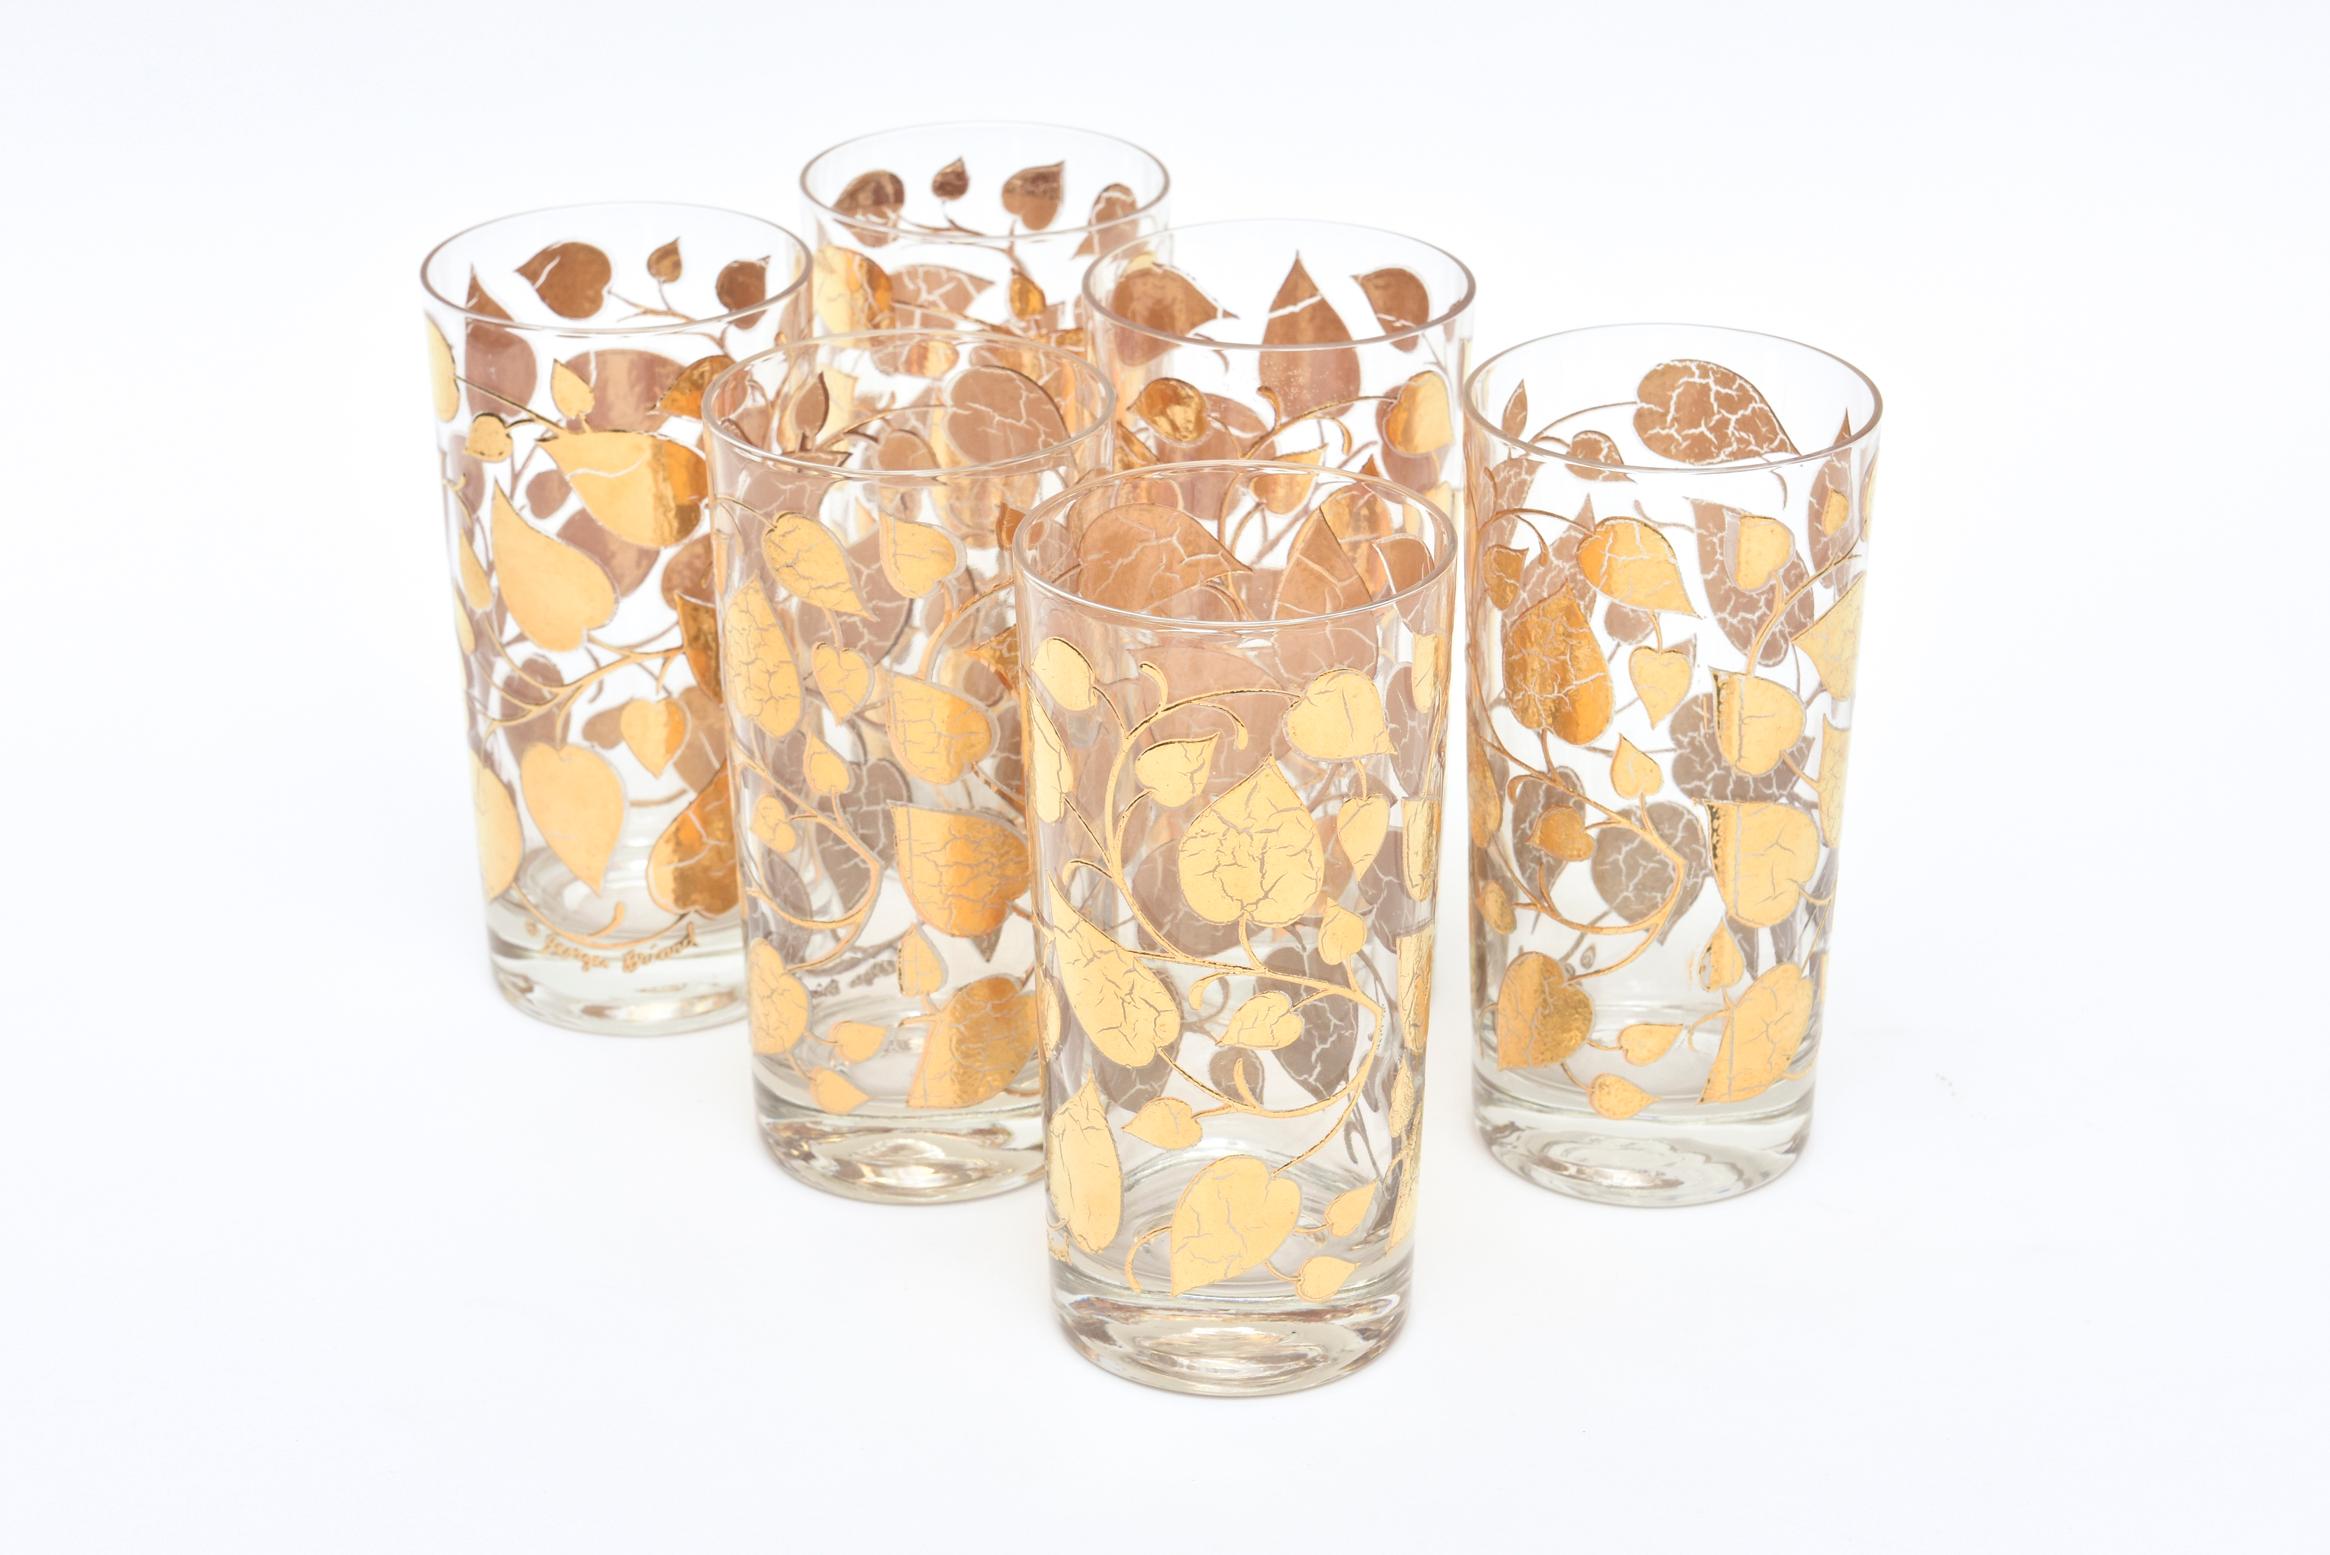 This Mid-Century Modern set of 6 signed Georges Briard highball glass barware are a pattern of applied gold painted overlay of leafs with detailed veining throughout the glass. These are from the 1960s and must be hand washed. They are not